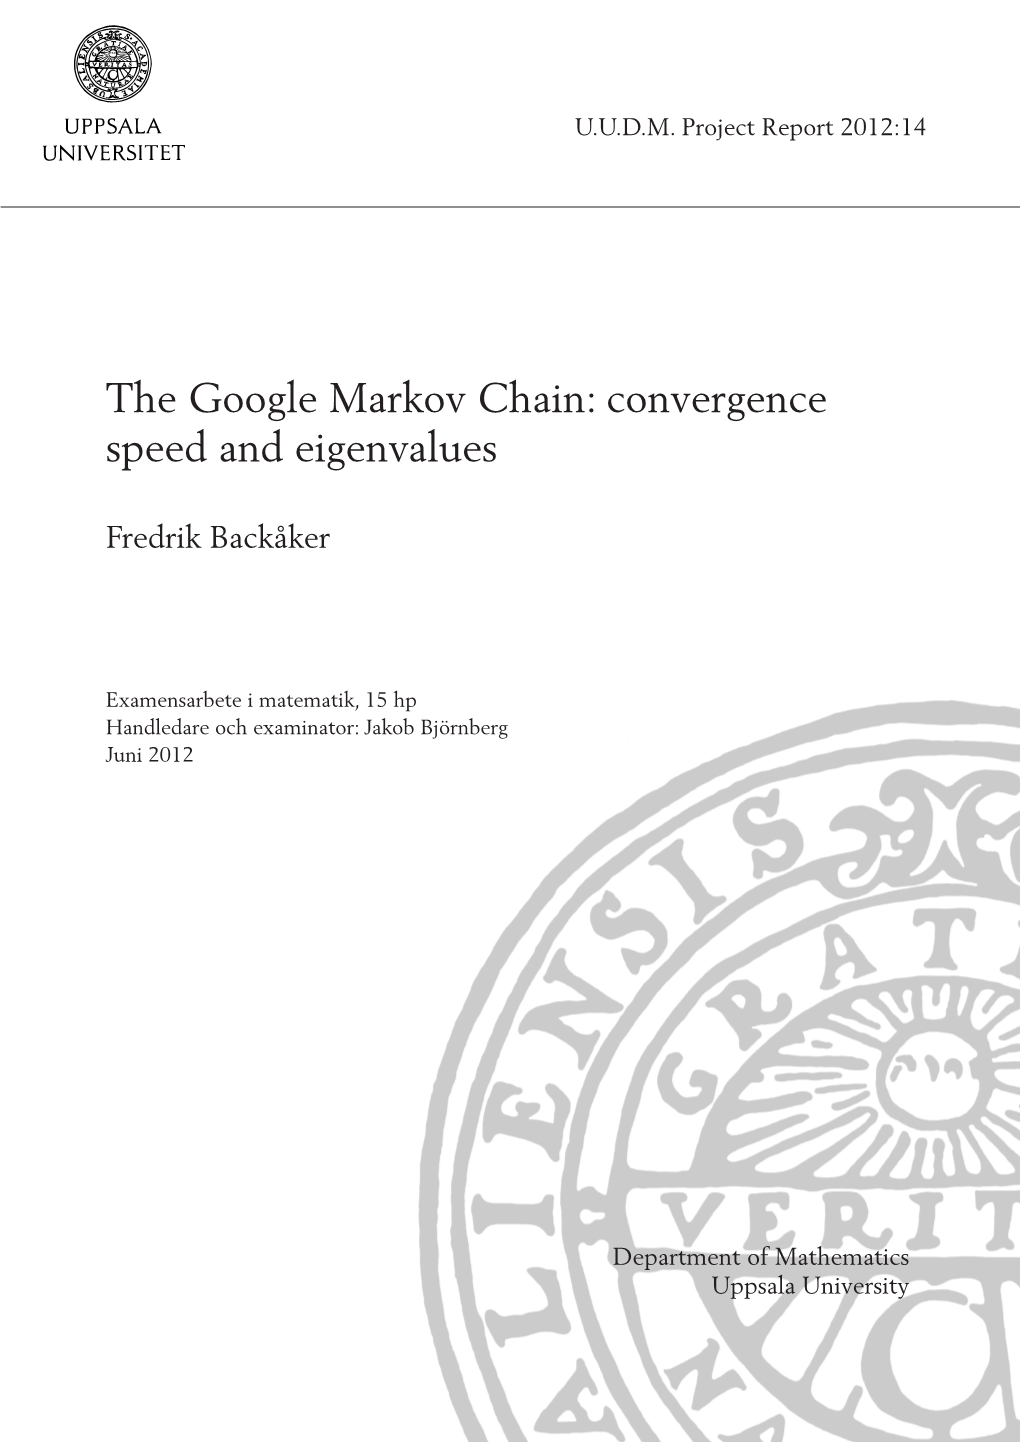 The Google Markov Chain: Convergence Speed and Eigenvalues